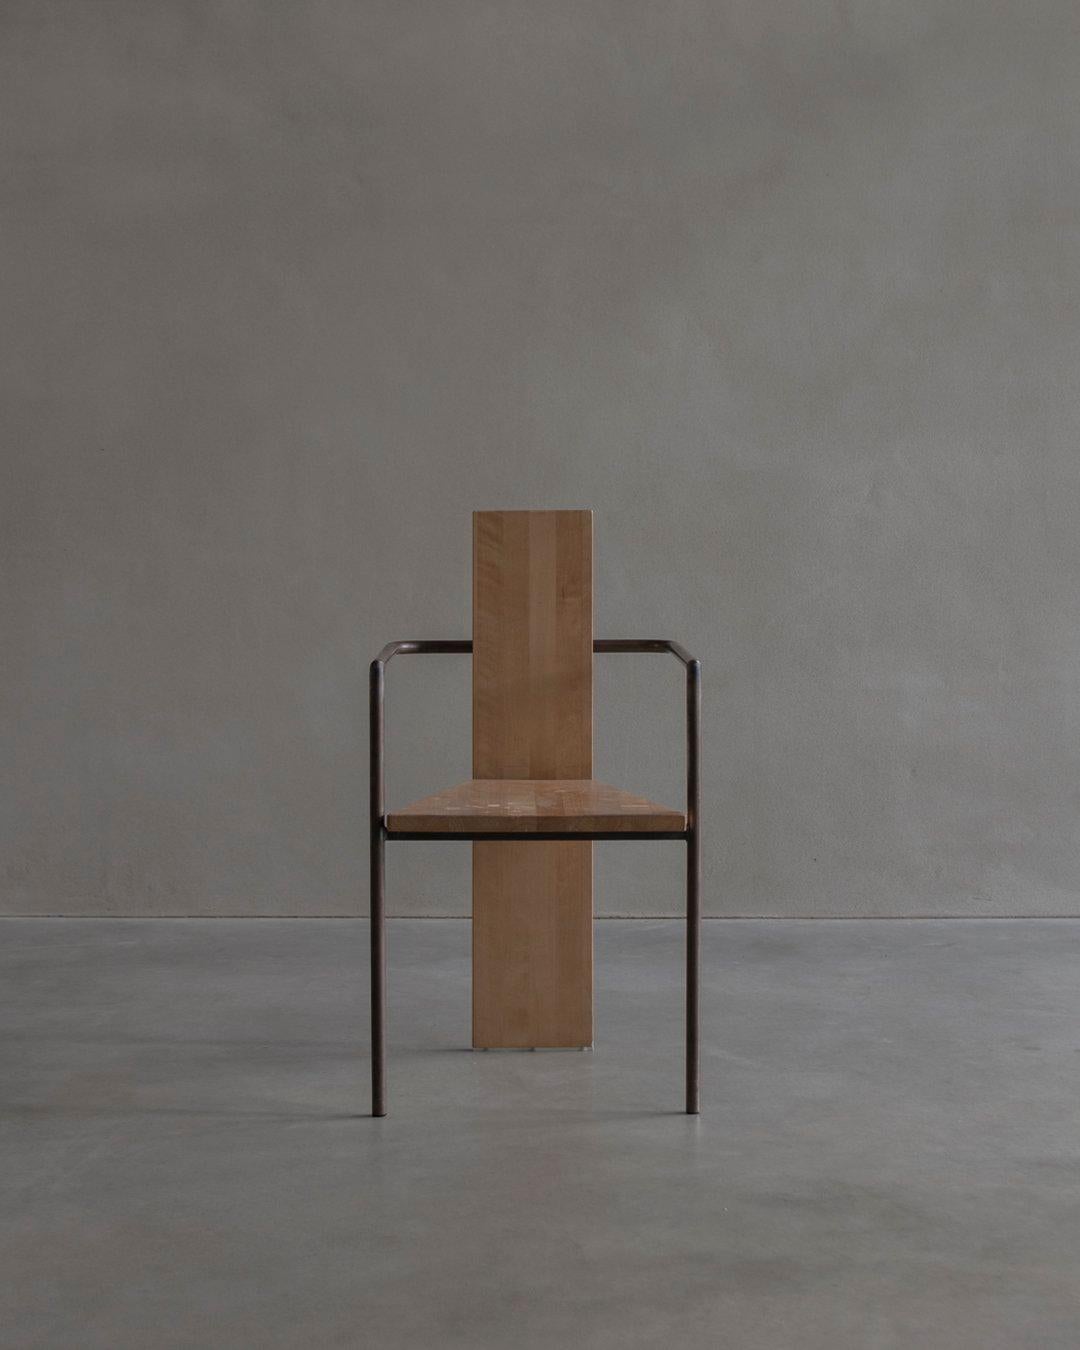 Jonas Bohlin (Swedish), made a significant impact with his innovative and minimalist approach to furniture design. Notable creations in his portfolio are the Concrete Chair and its wood variant, the Wooden Concrete Chair. Produced by Källemo, these